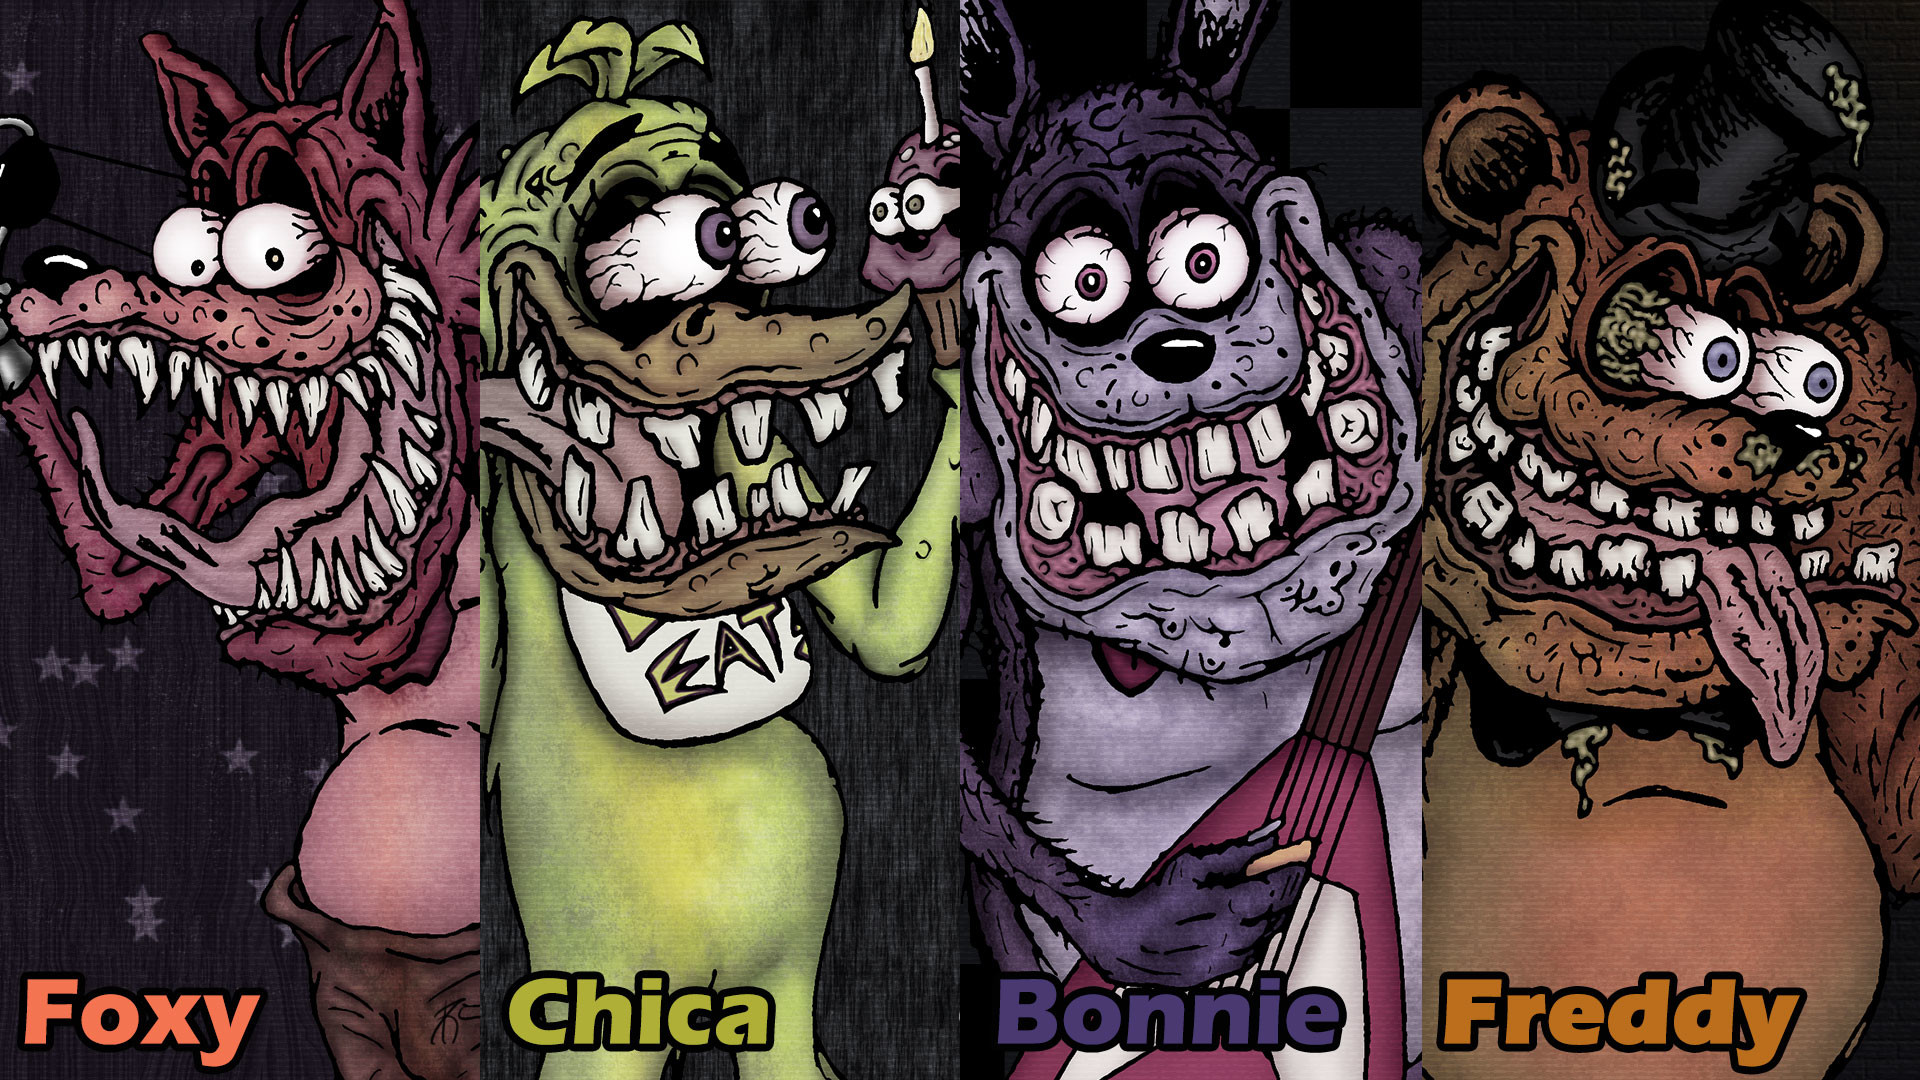 Five Nights at Freddy – Ed Roth Style Wallpaper by SestrenNK